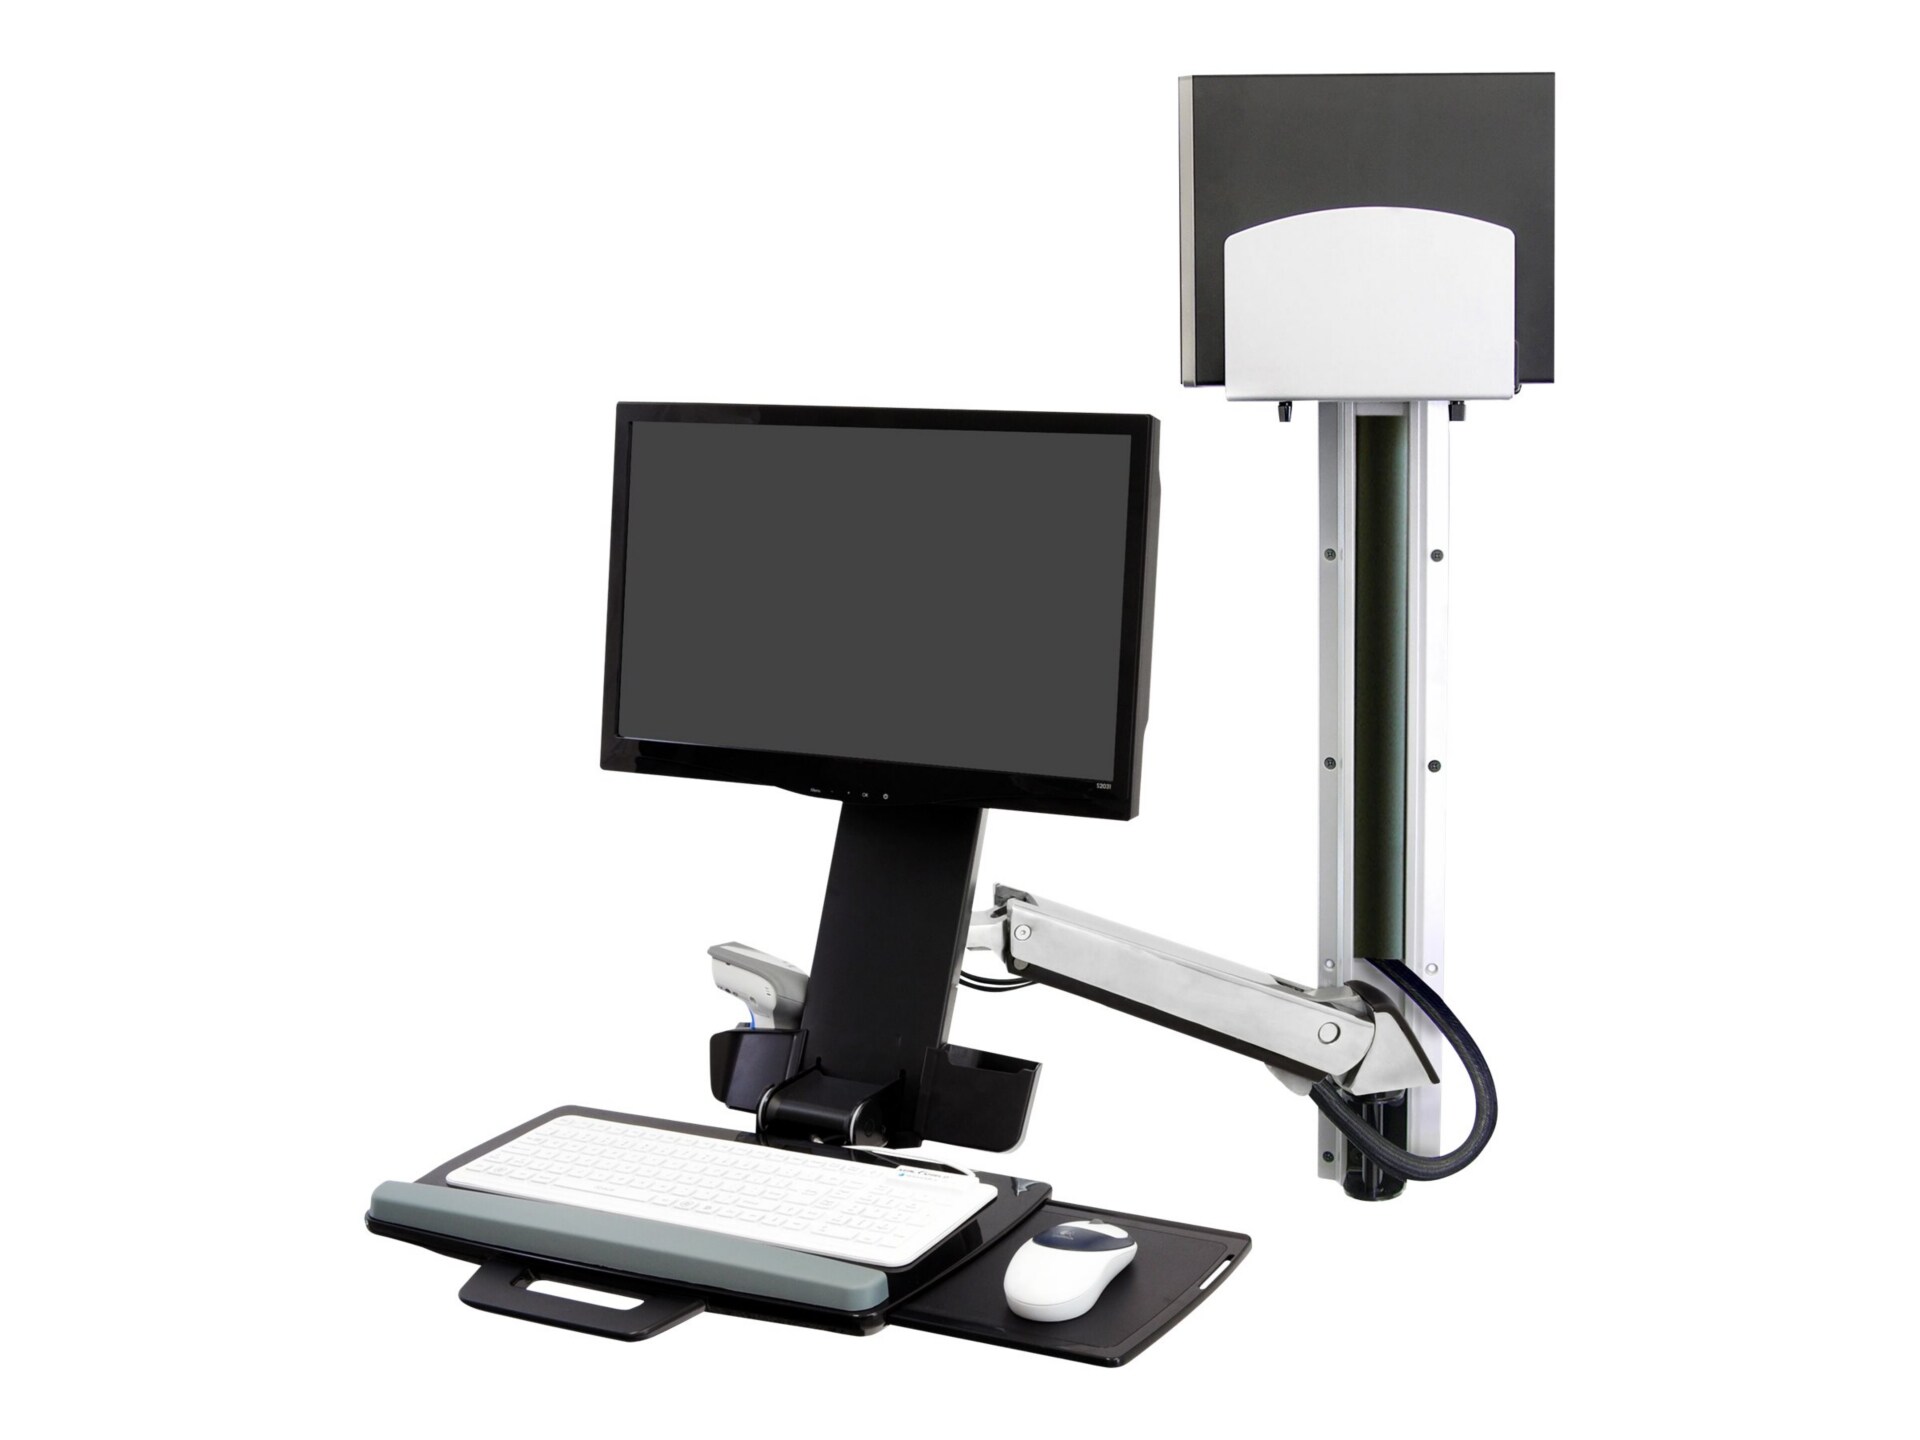 Ergotron StyleView mounting kit - Patented Constant Force Technology - for LCD display / keyboard / mouse / barcode